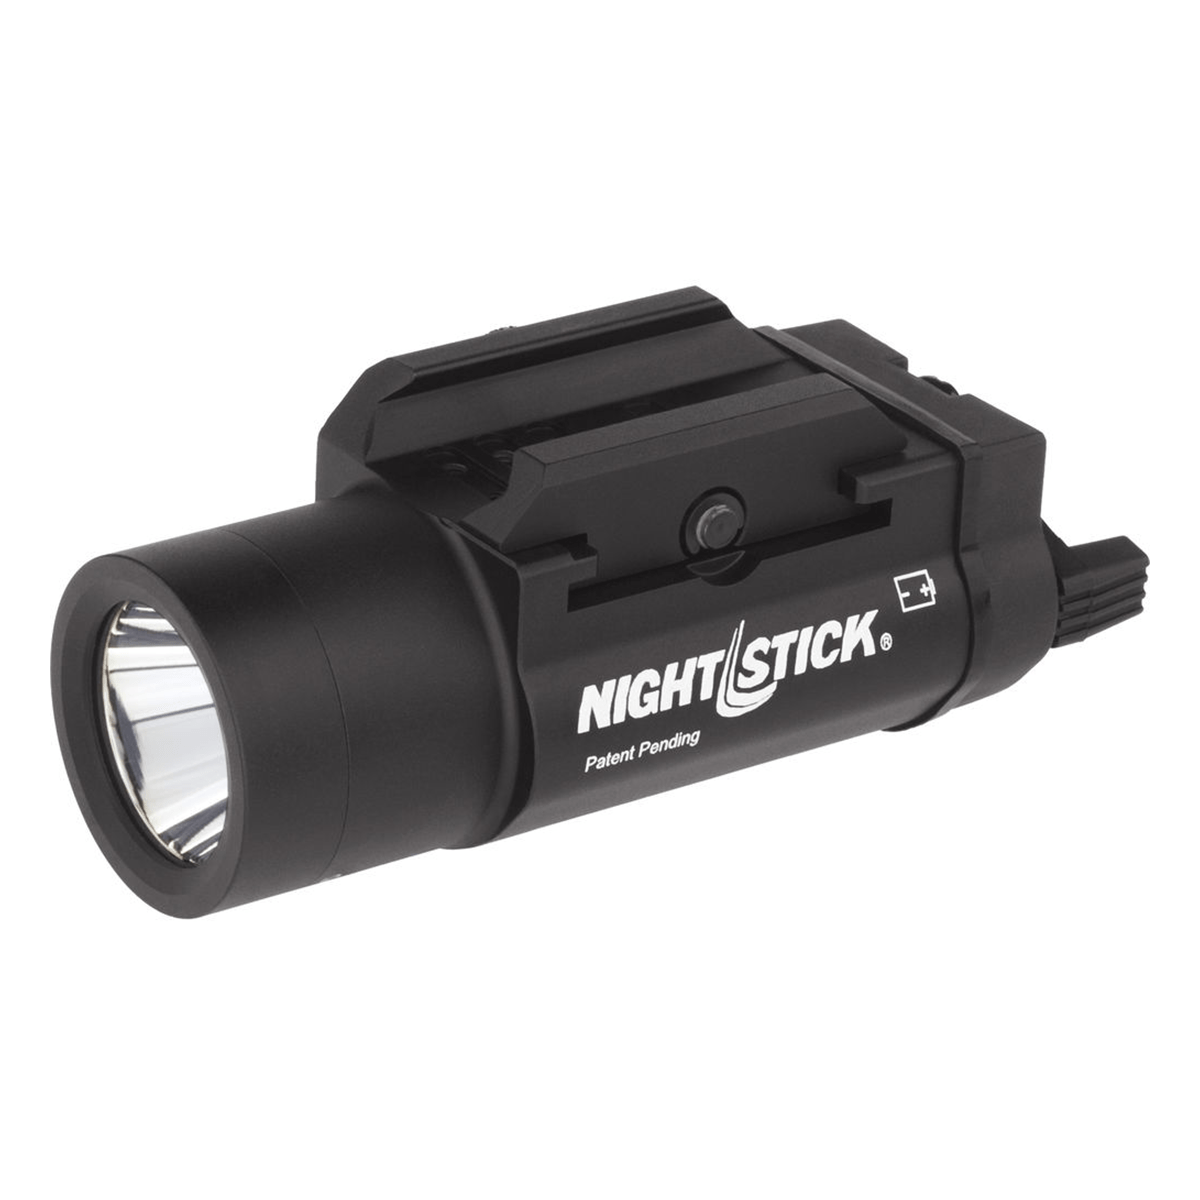 Nightstick 850XL Tactical Weapon Mounted Light